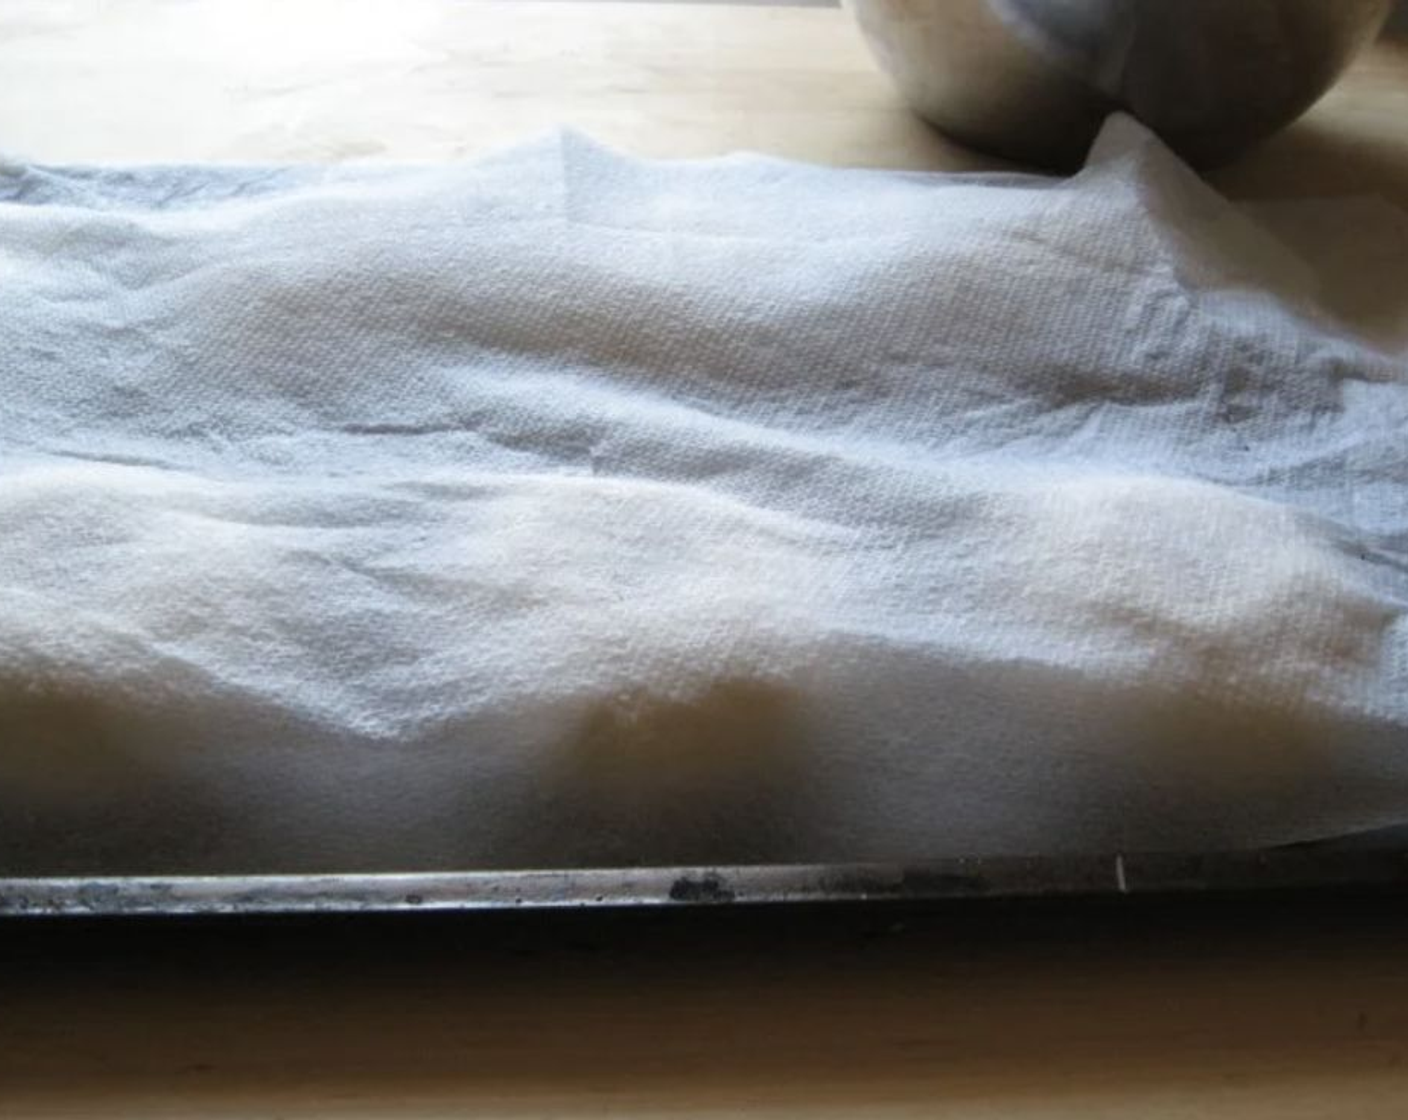 step 8 After shaping the dough rounds and placing them on the cookie sheet, cover with a damp kitchen towel and allow to rest for 10 minutes.